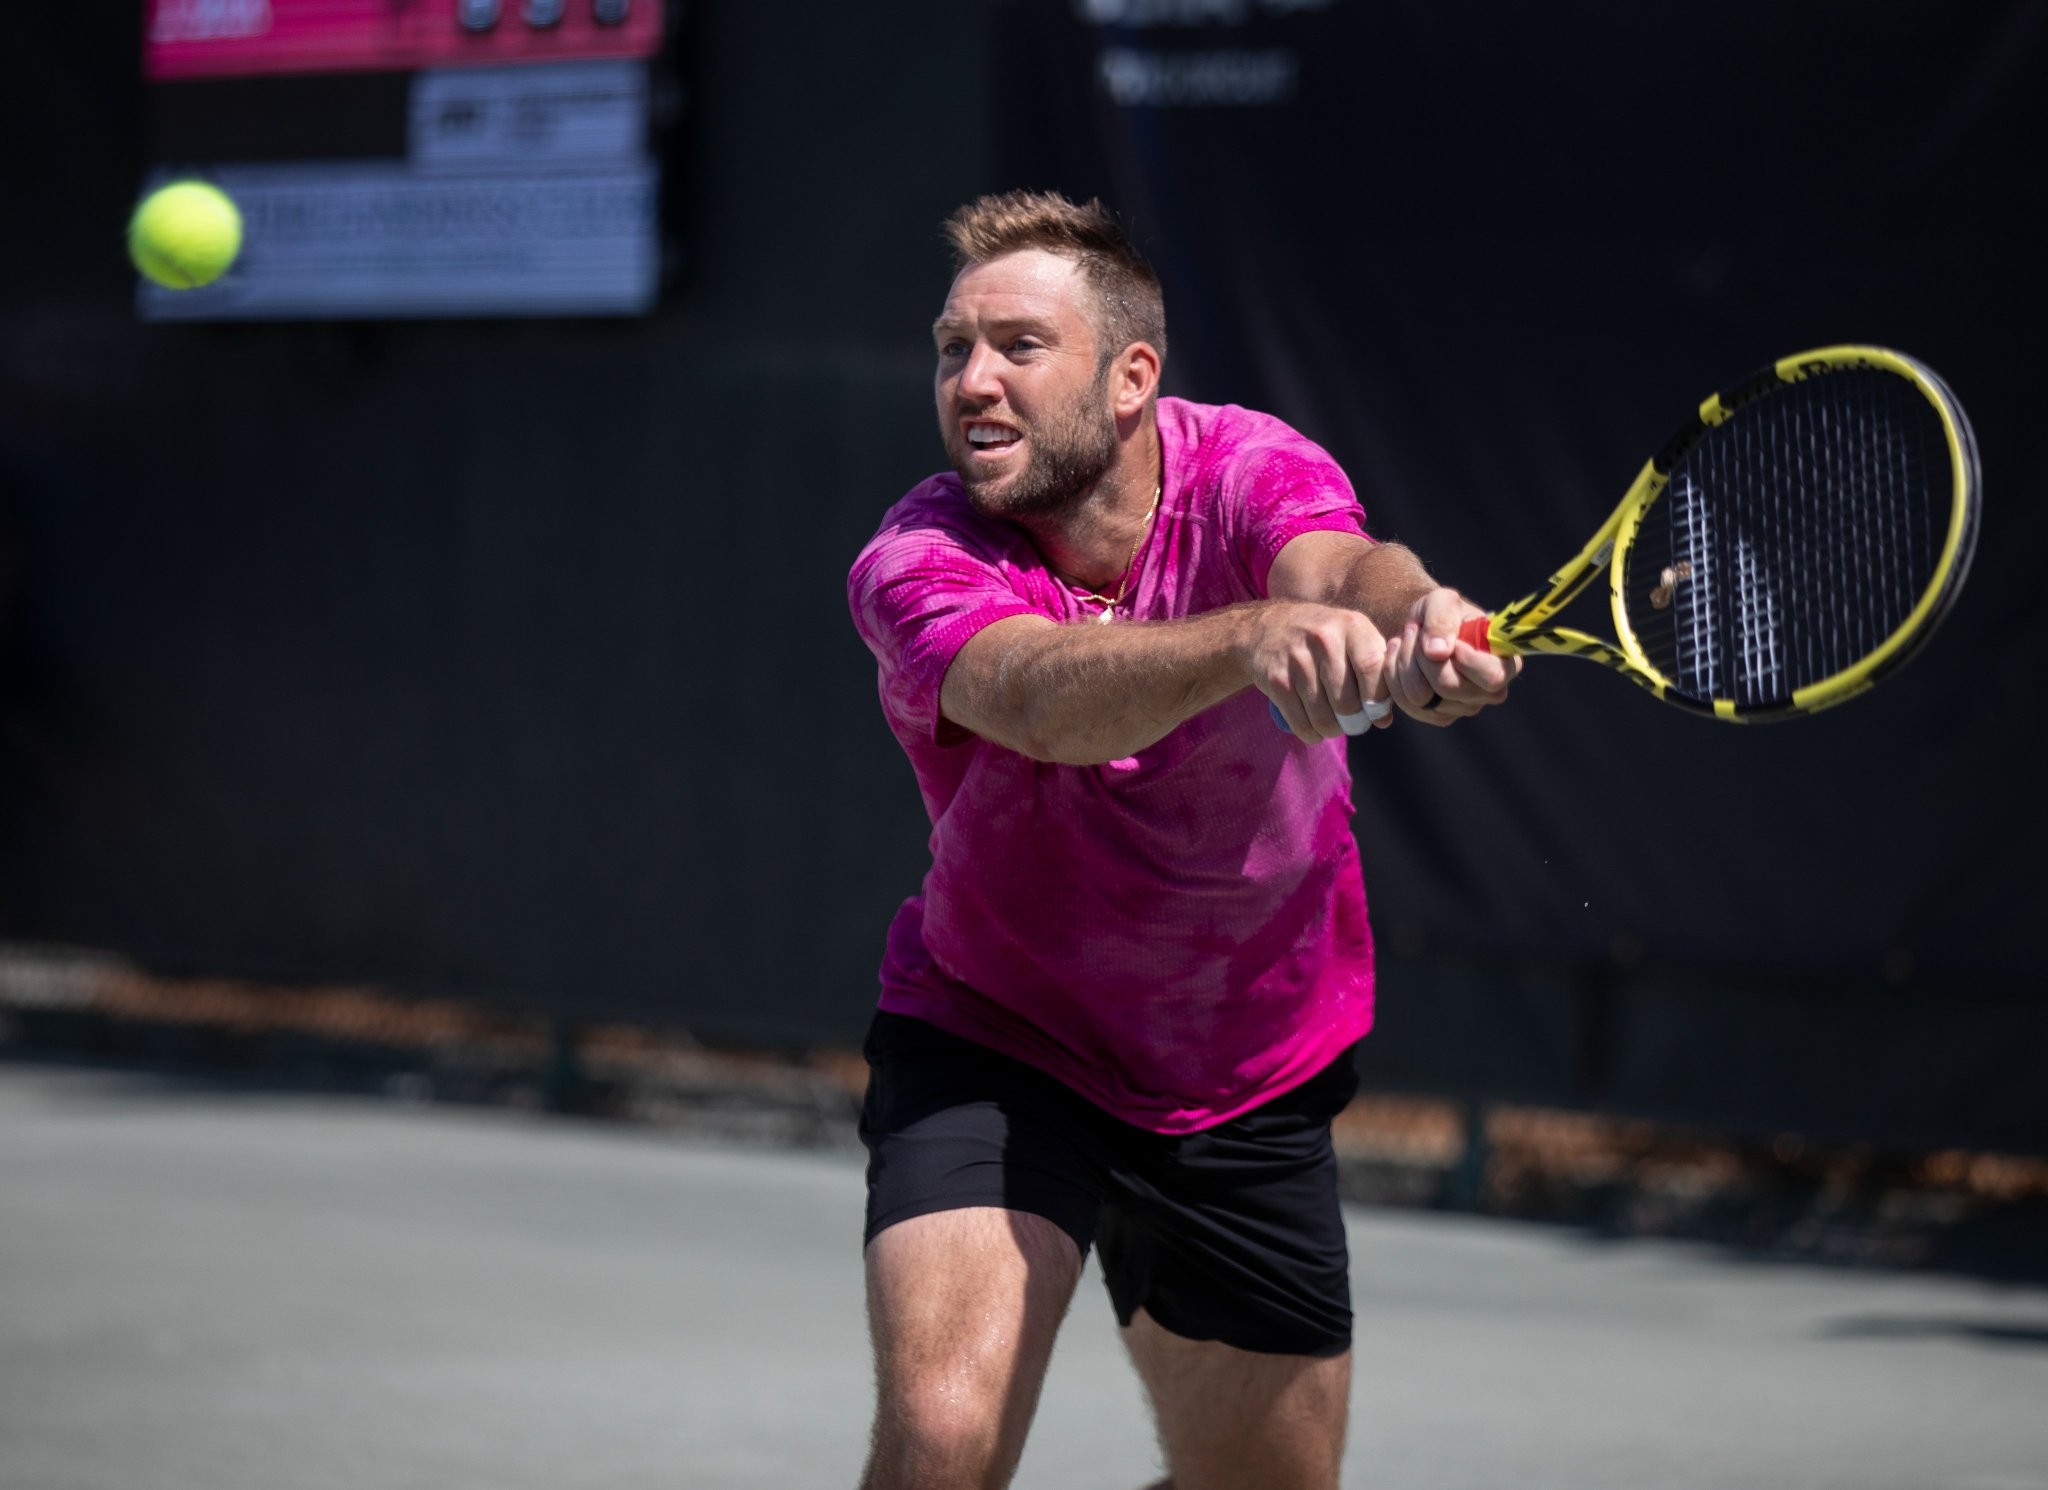 2023 SAVANNAH CHALLENGER PREVIEW Pro tennis tournament gaining community support in 13th year at The Landings Club Sports Savannah News, Events, Restaurants, Music Connect Savannah